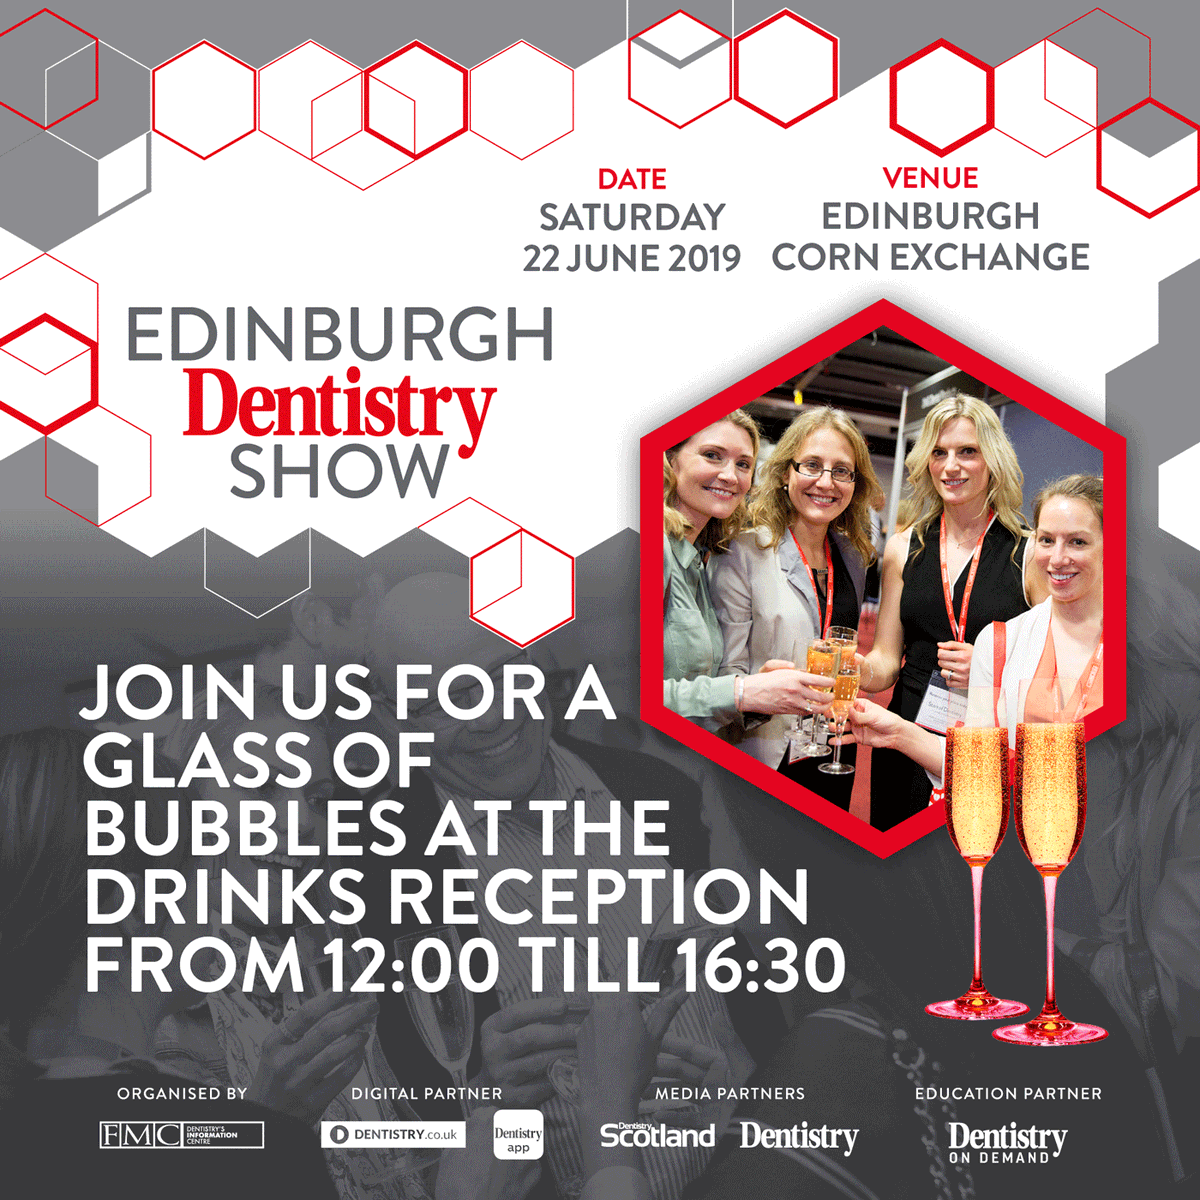 Join us for a glass of bubbles at the drinks reception from 12pm until 4:30pm at the unmissable Edinburgh Dentistry Show. Register now& attend for free!
👉 bit.ly/2VGzbll 👈  

#edinburghdentistryshow #dentist #dentistry #digitaldentistry #dentistlife #dentistedinburgh